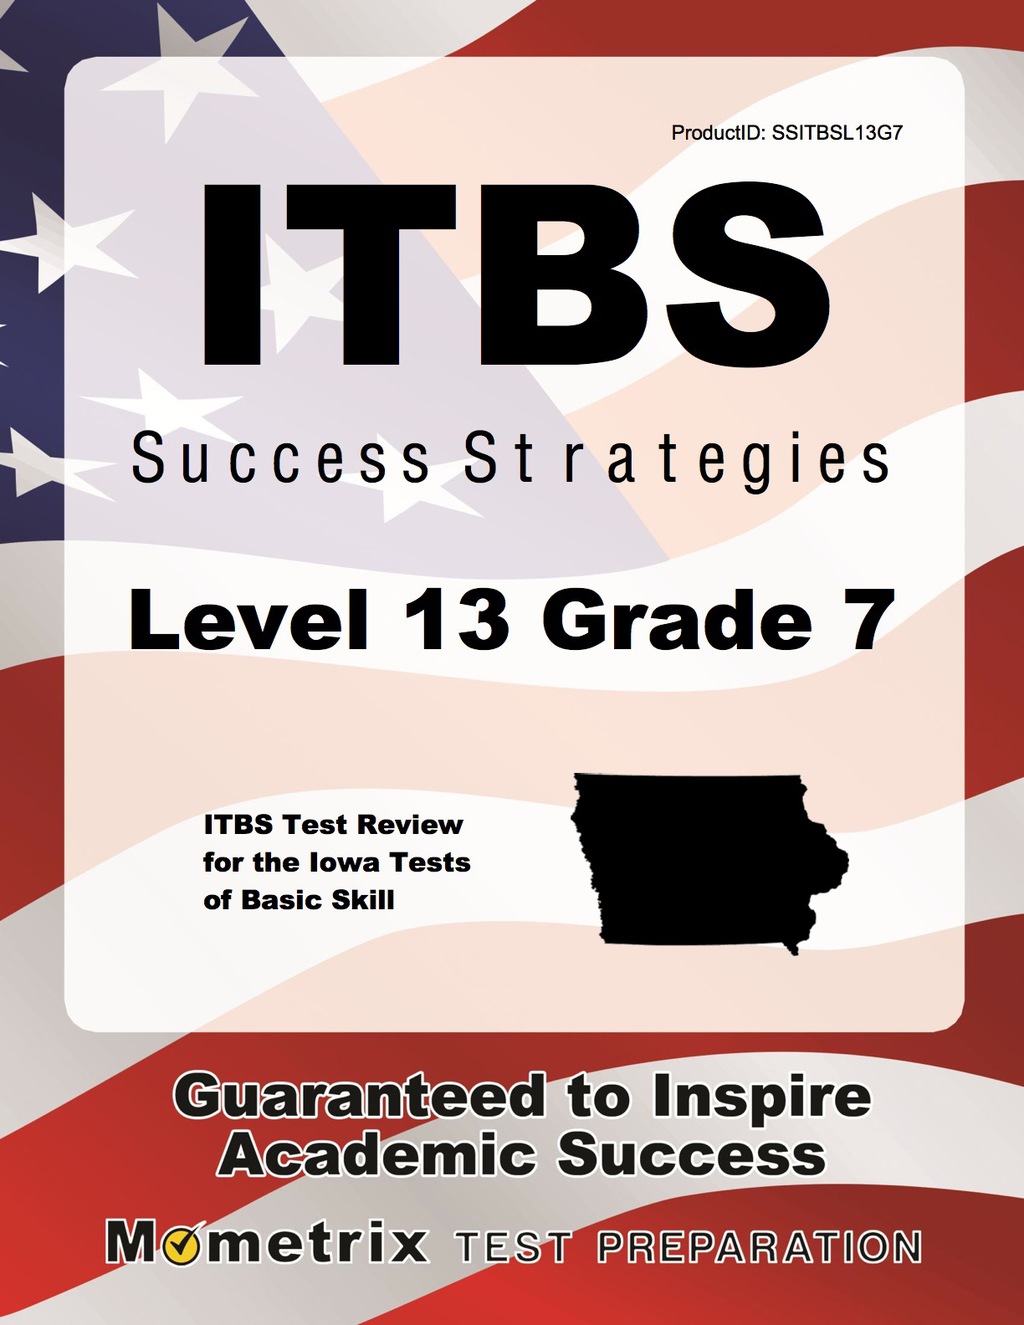 ISBN 9781630949846 product image for ITBS Success Strategies Level 13 Grade 7 Study Guide - 1st Edition (eBook) | upcitemdb.com